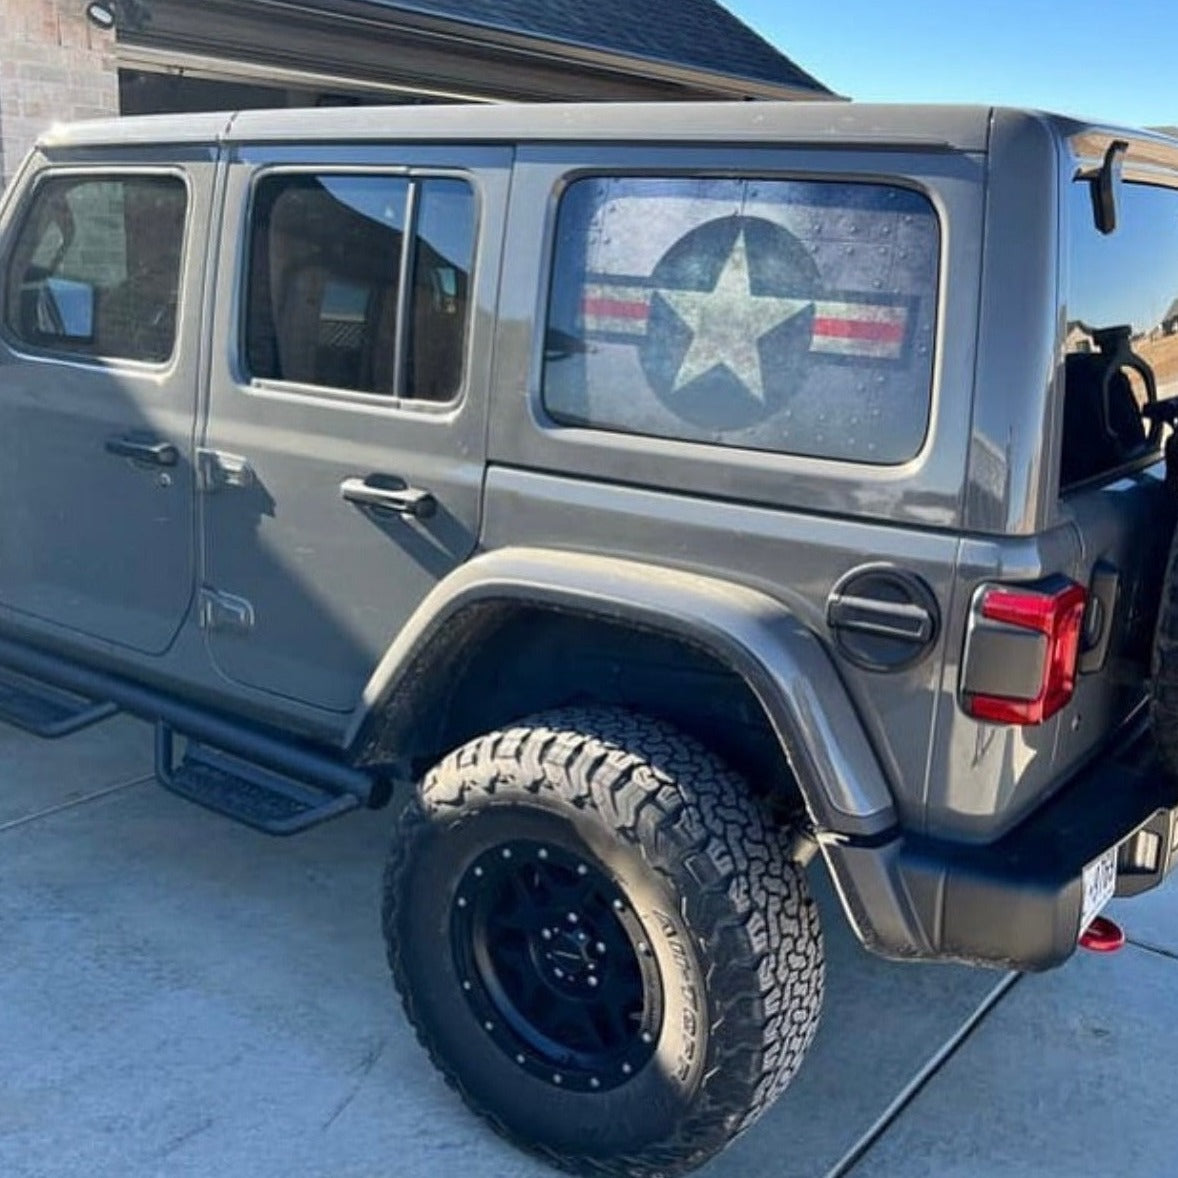 Patriotic military Captain America star and metal look Jeep Wrangler window decal.